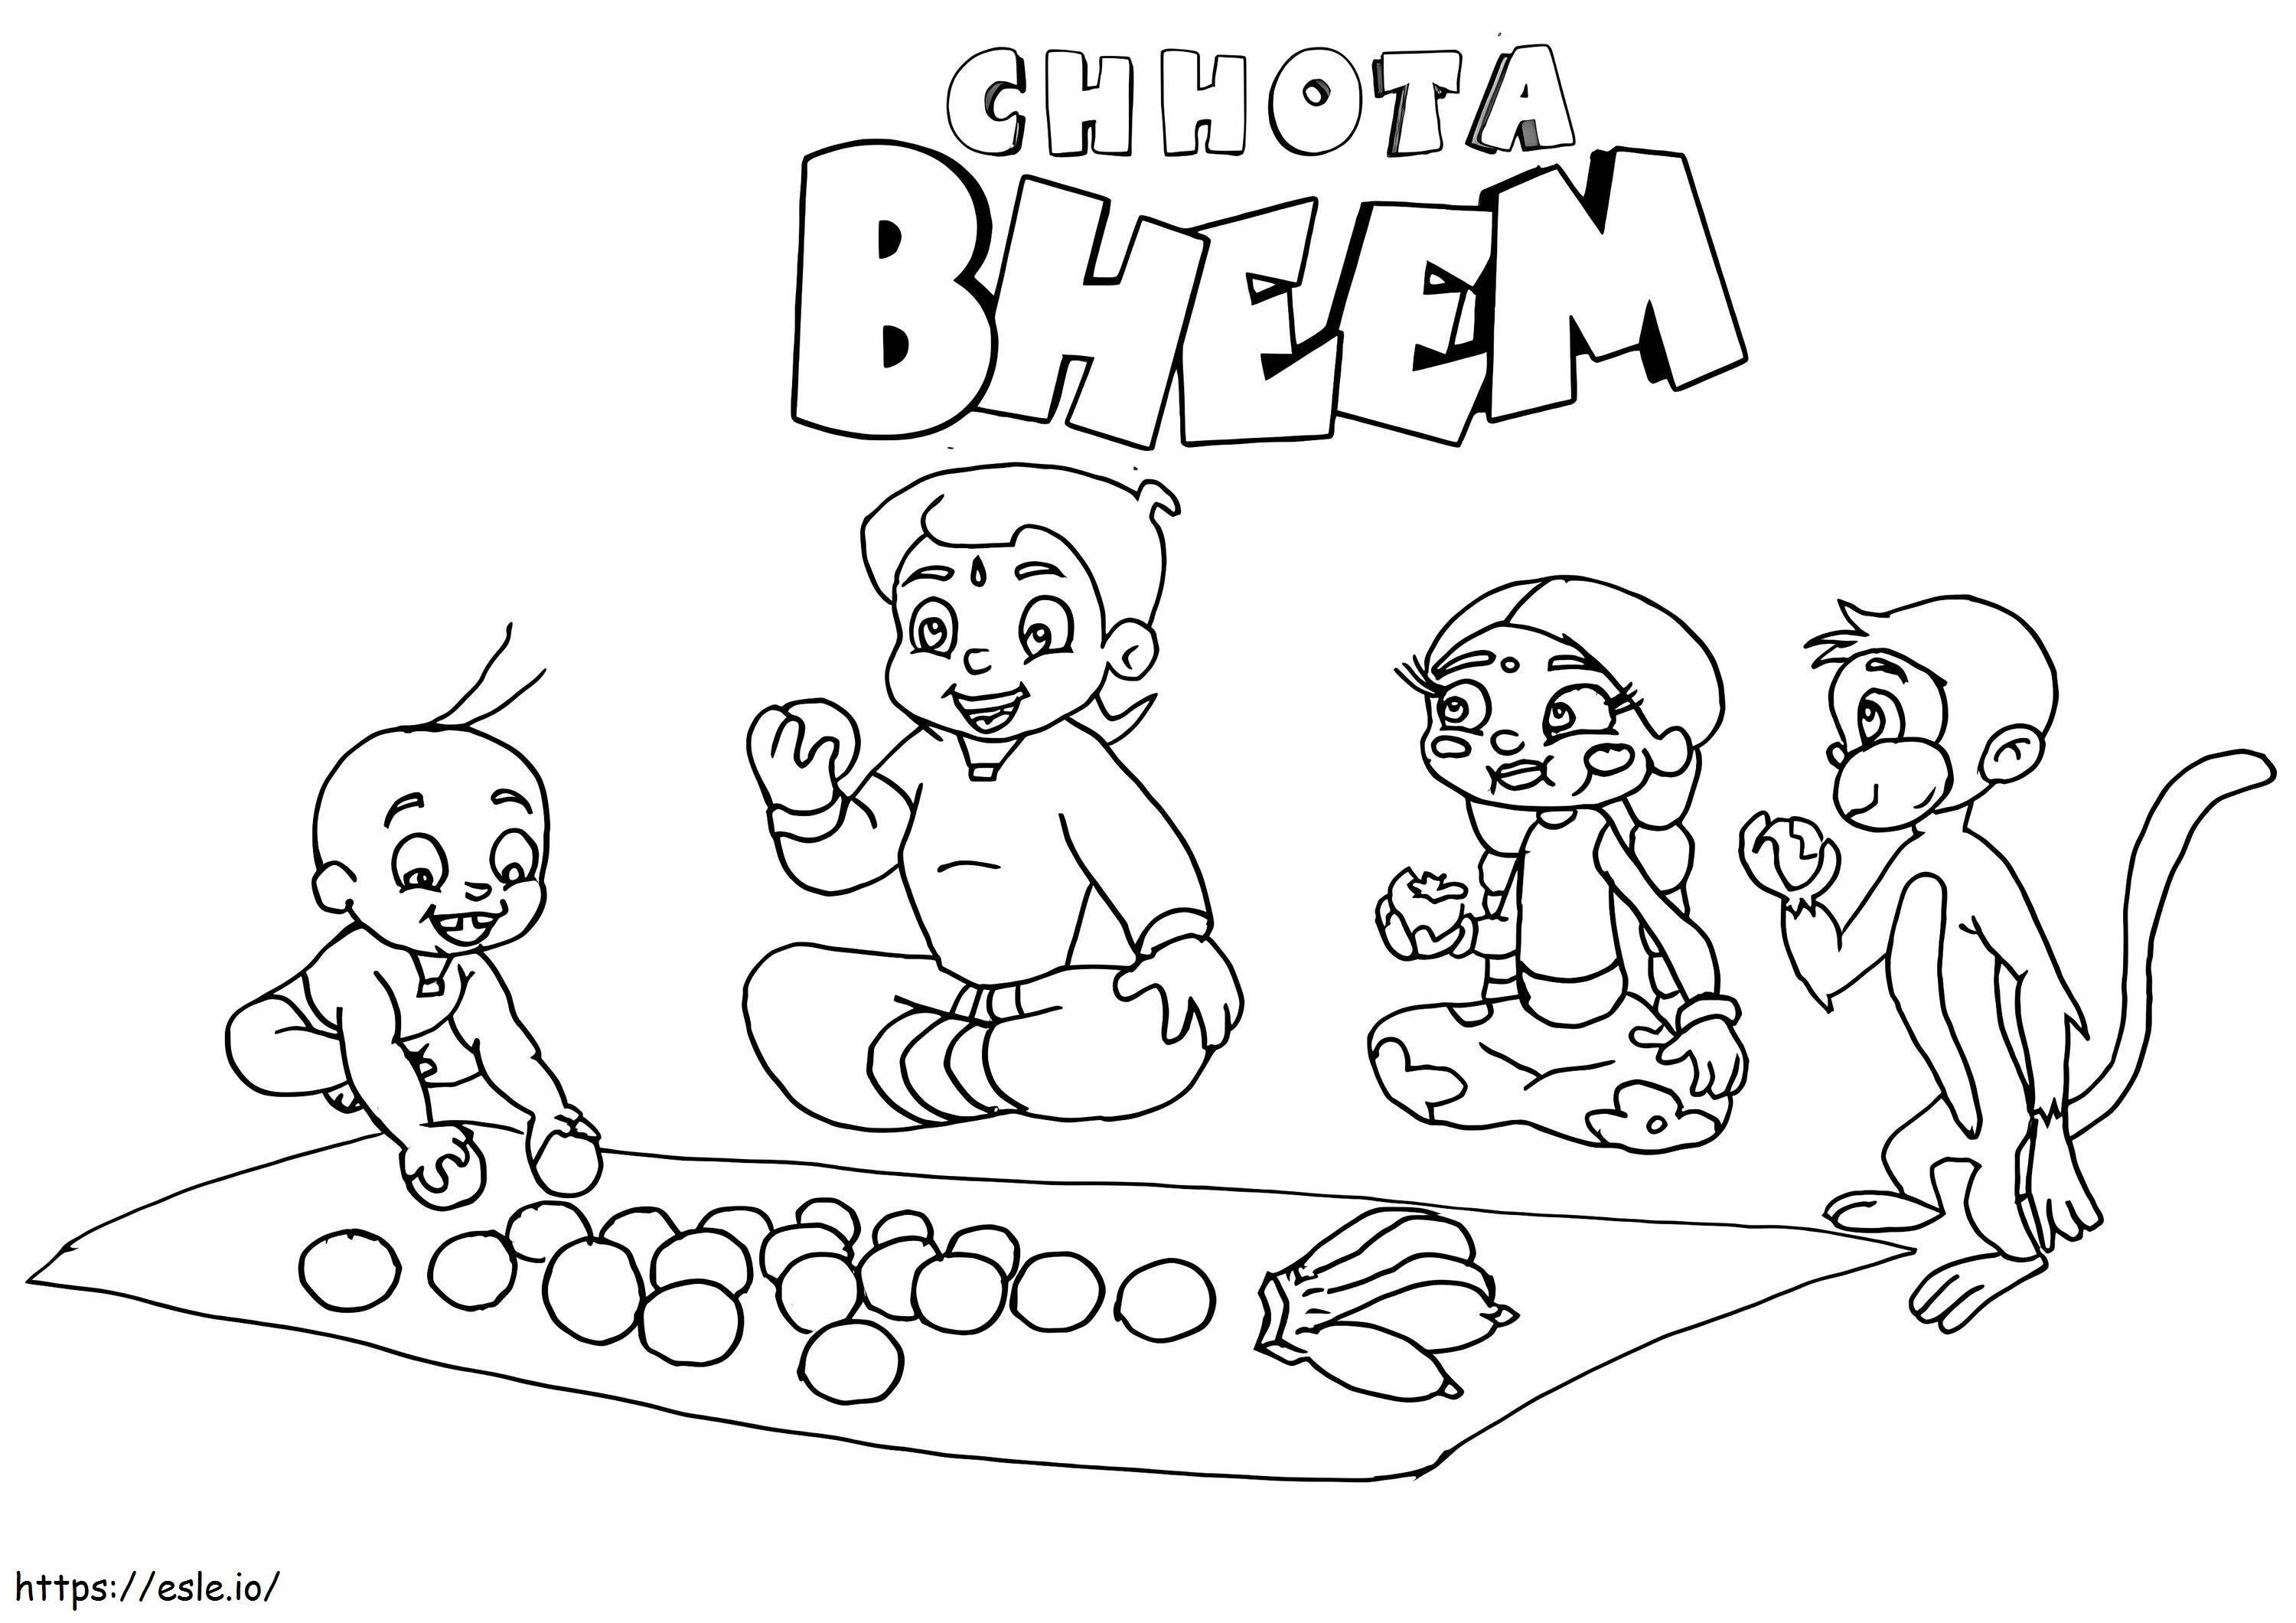 Chhota Bheem With Friends coloring page